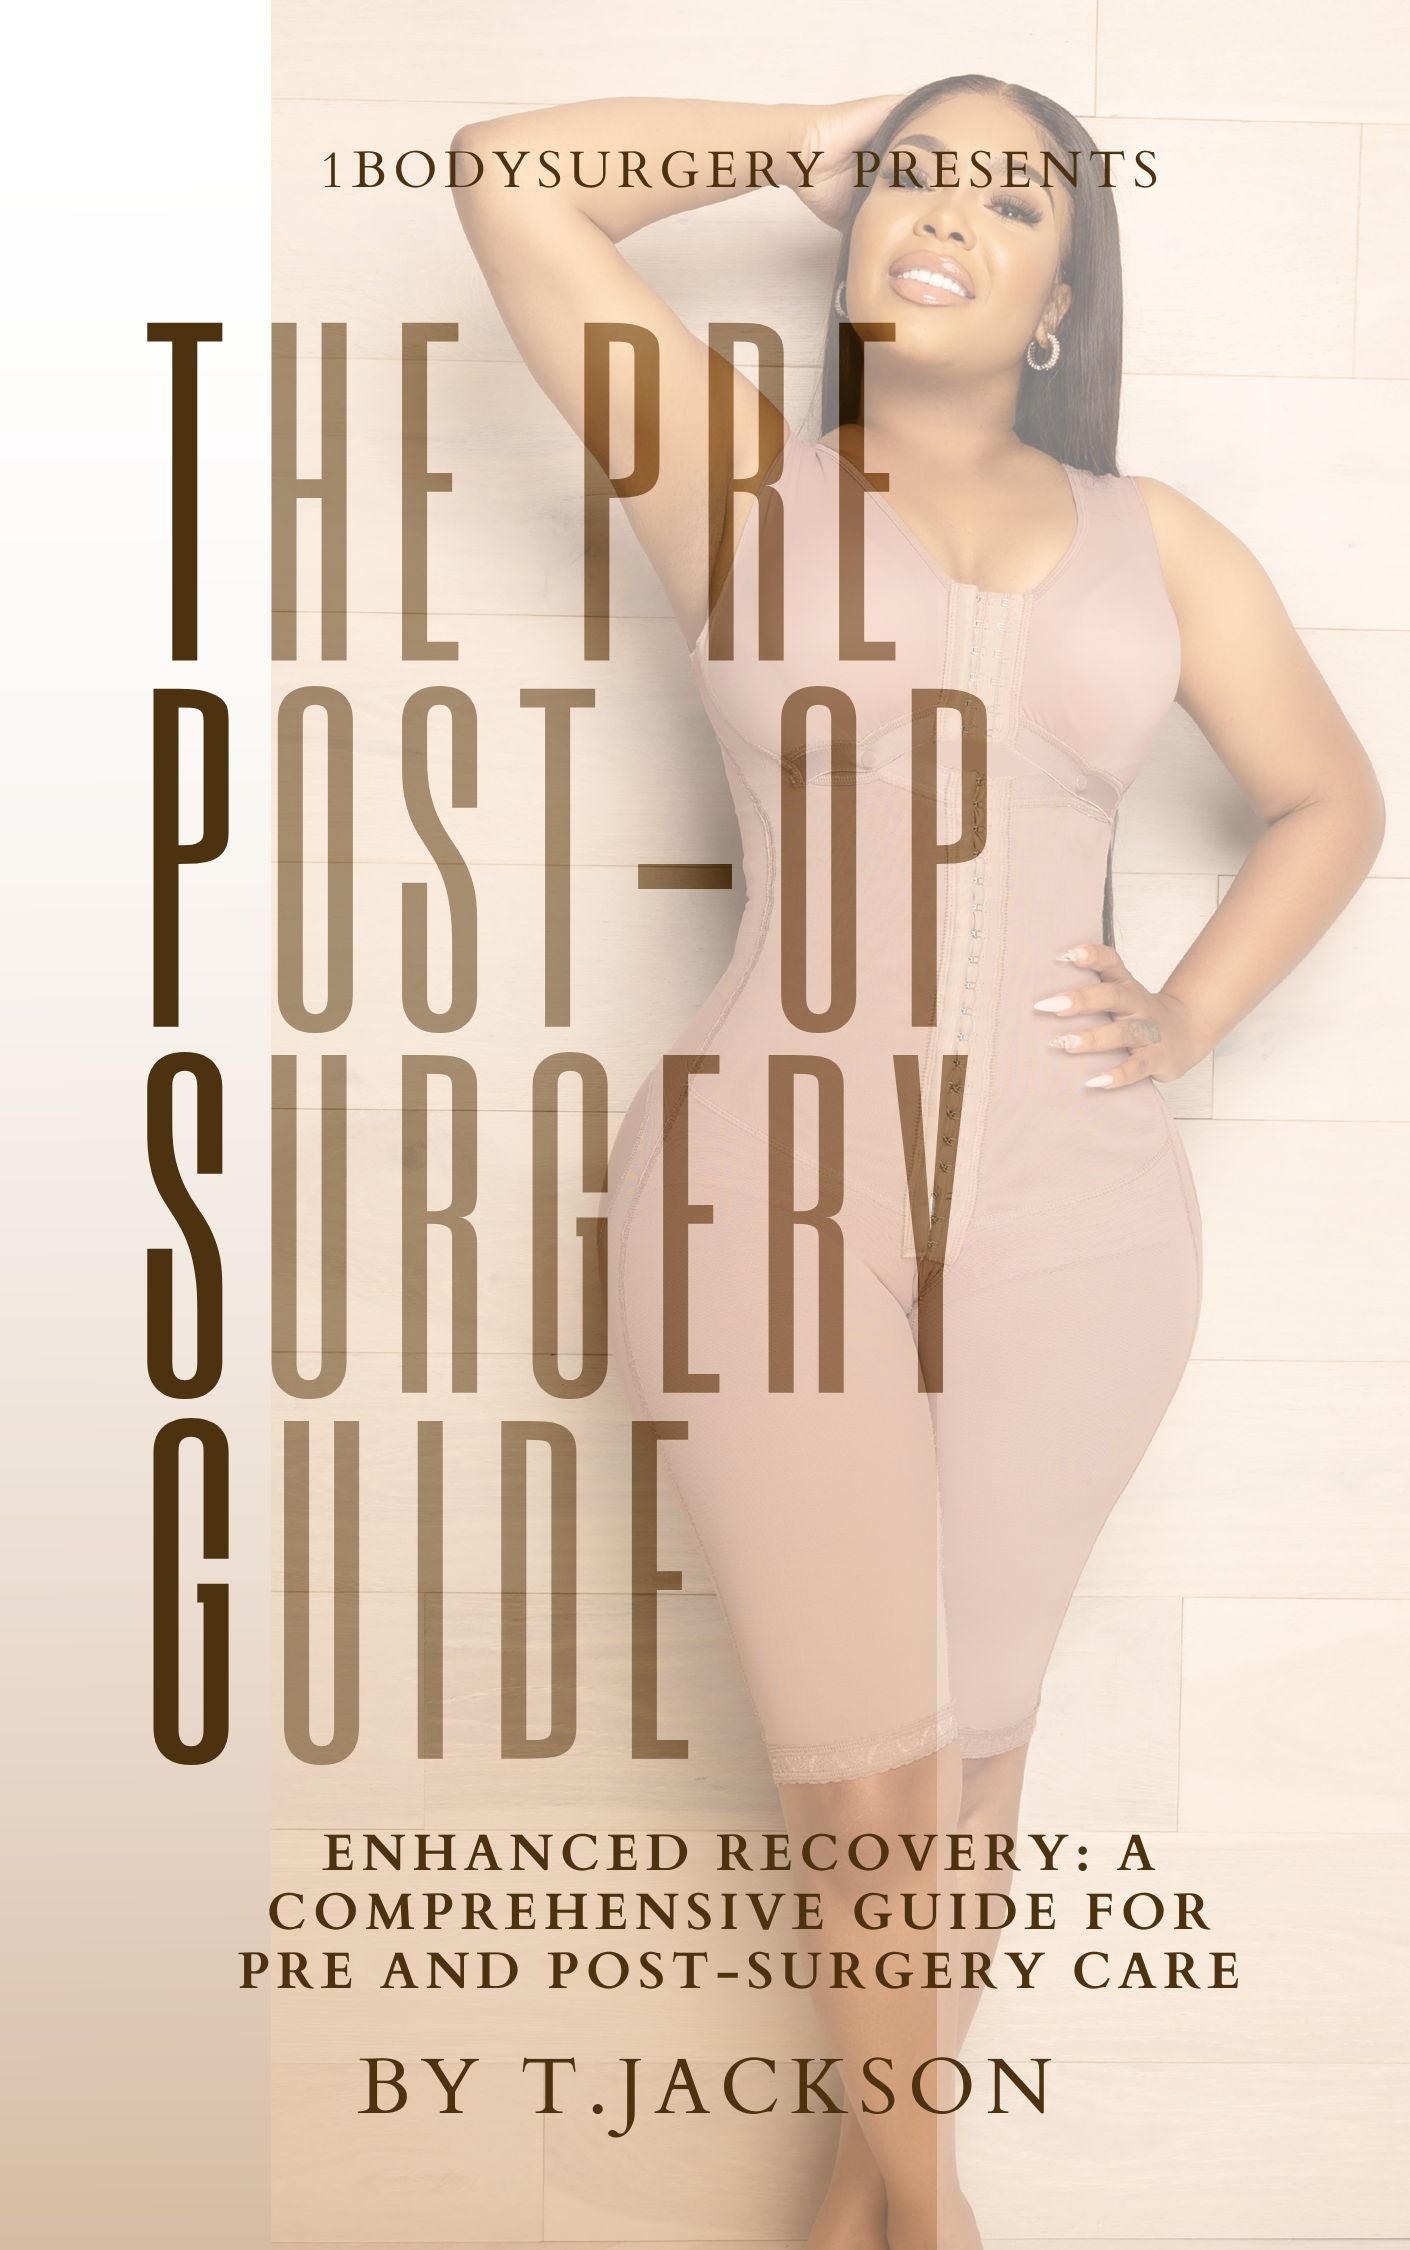 "Enhanced Recovery: A Comprehensive Guide for Pre and Post-Surgery Care"